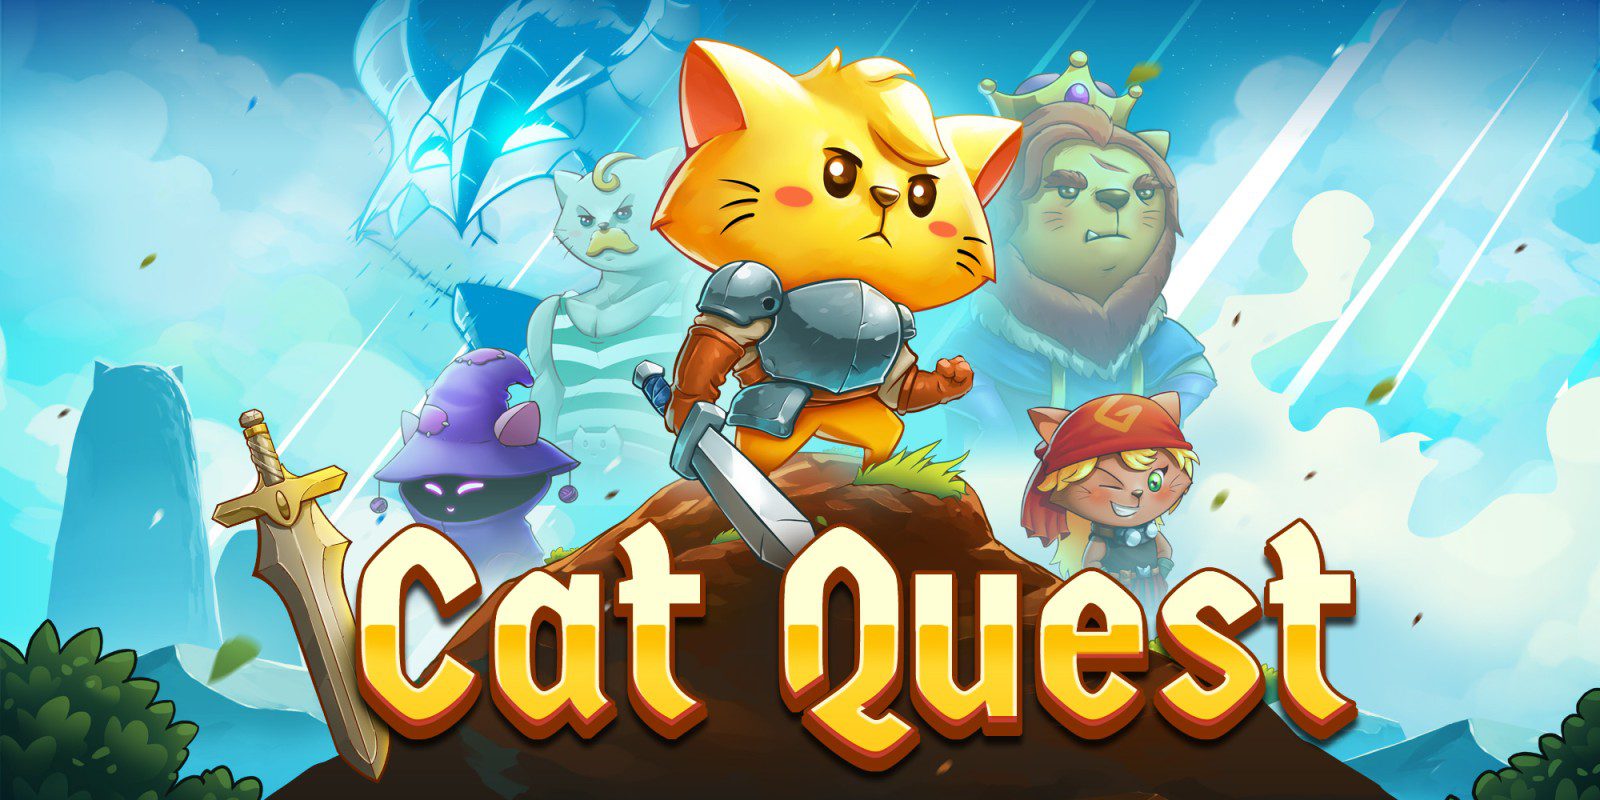 Cat Quest is making its way onto the Nintendo Switch